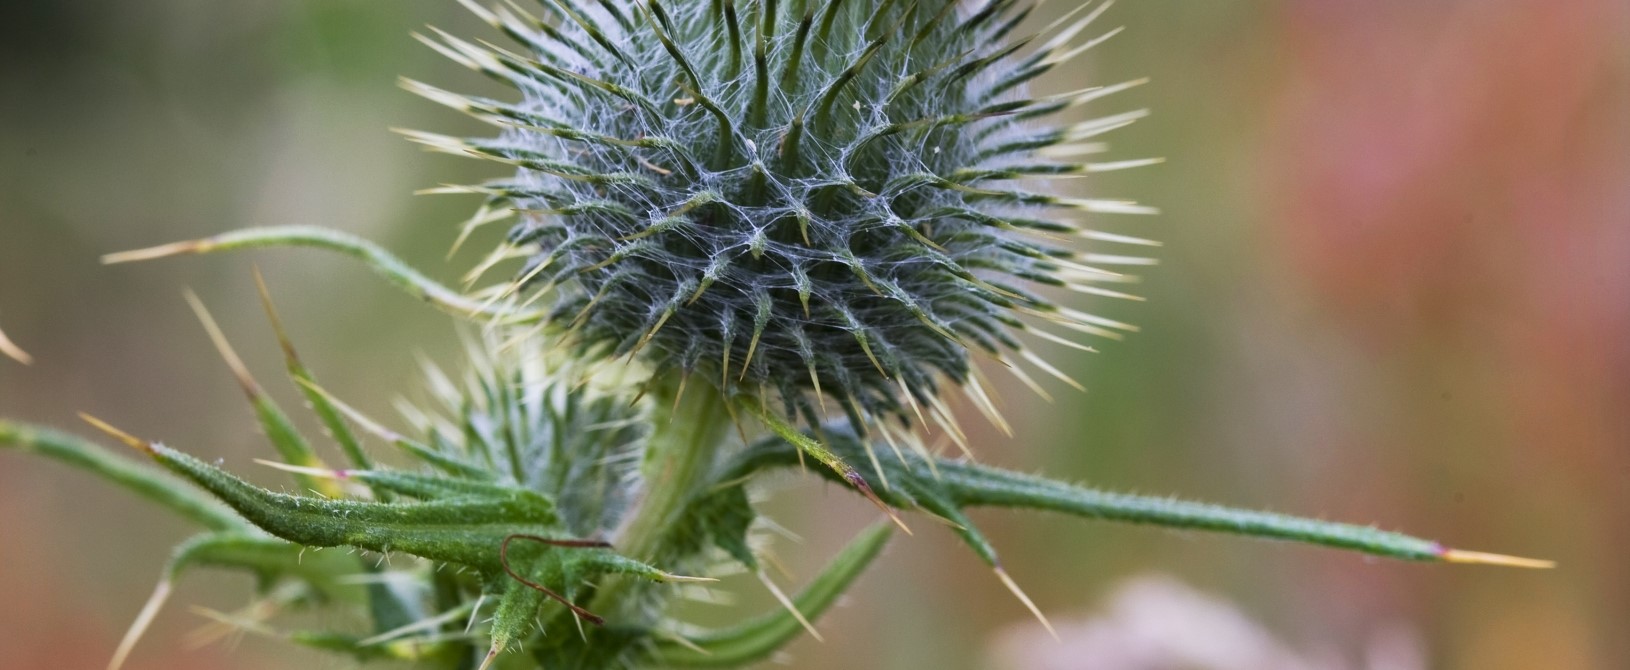 A close up of a scottish thistle in early spring